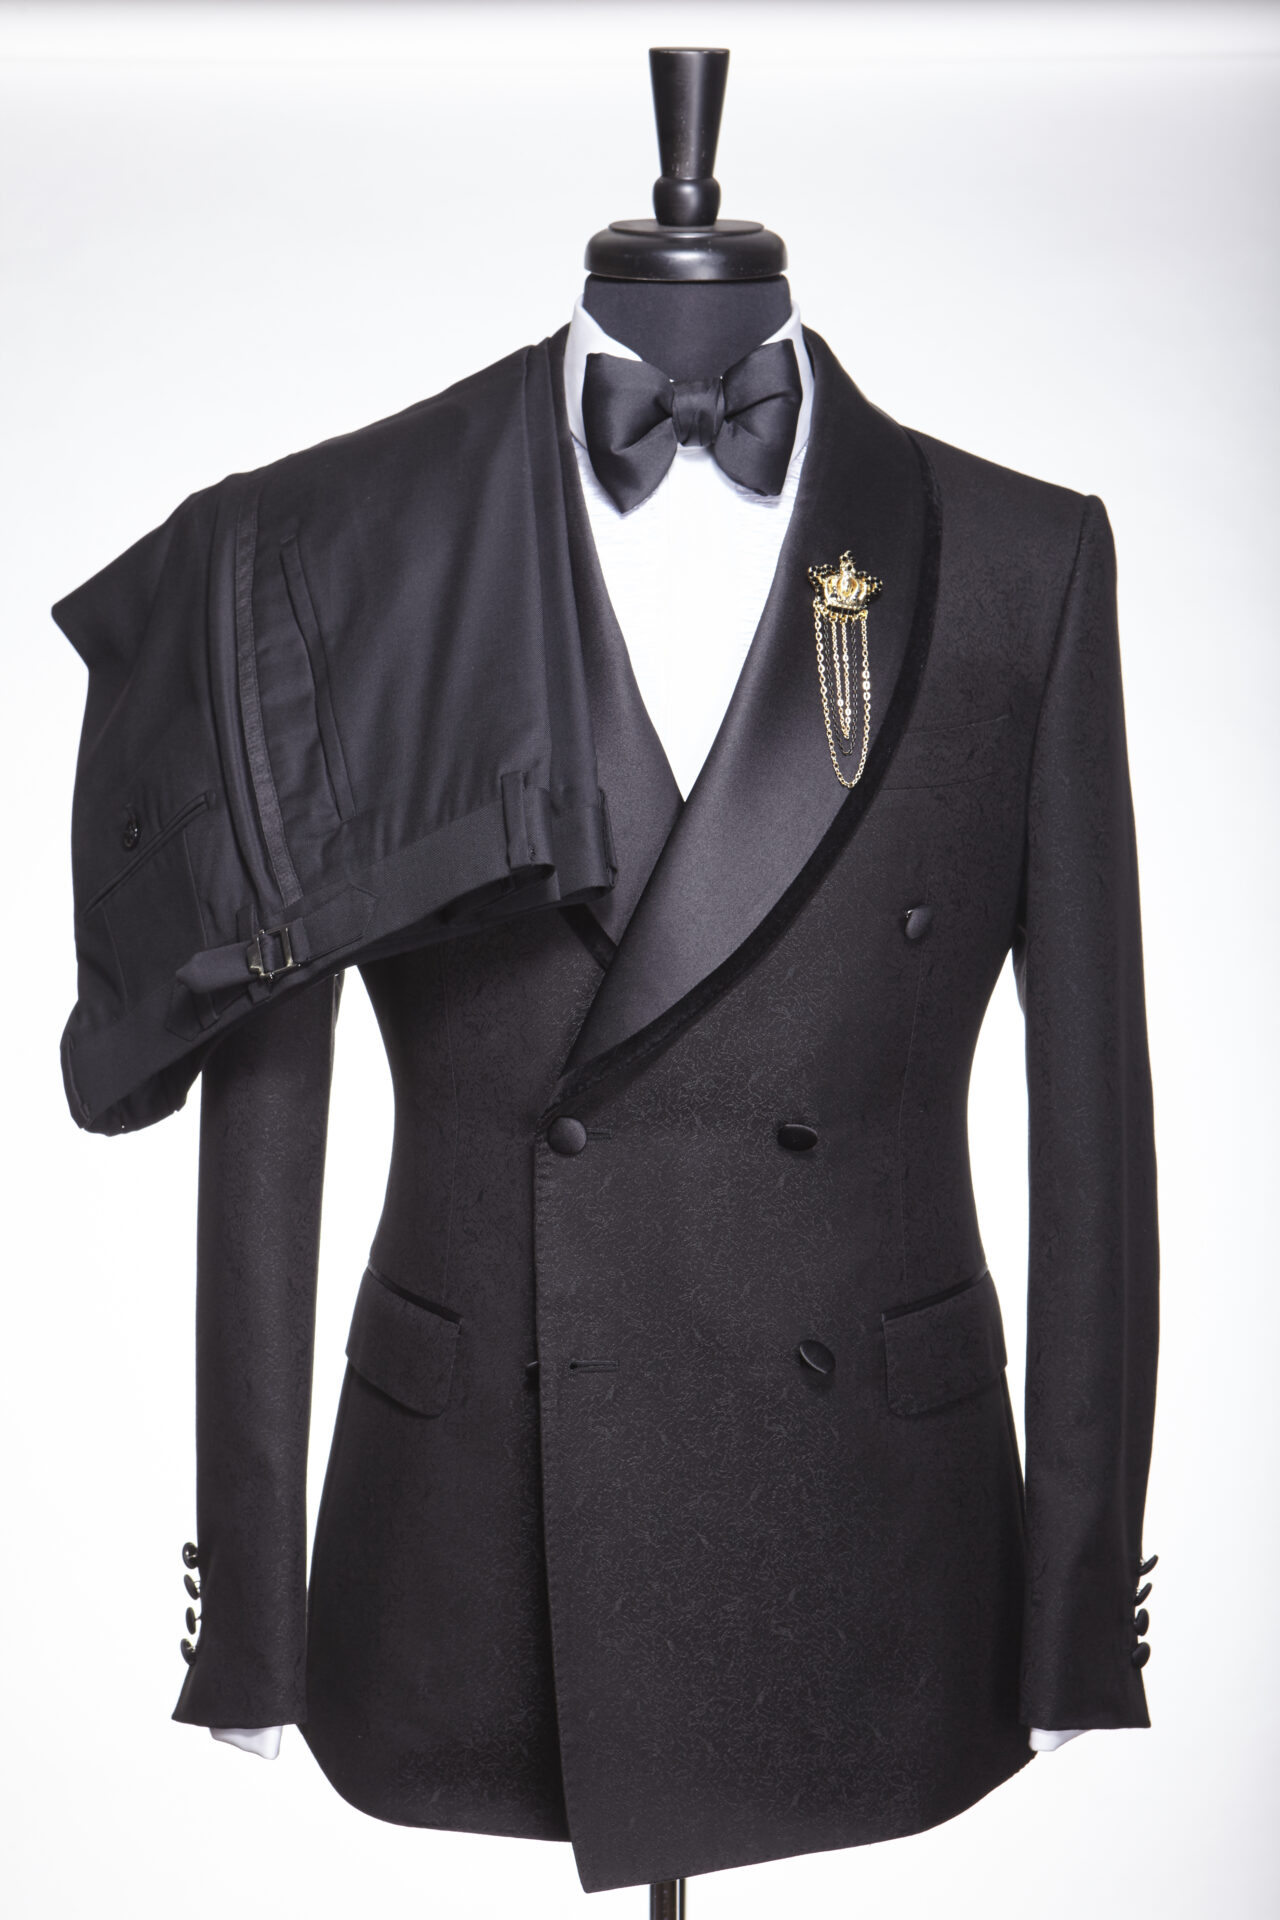 STANLION DOUBLE BREASTED JACQUARD TUXEDO - Stanlion